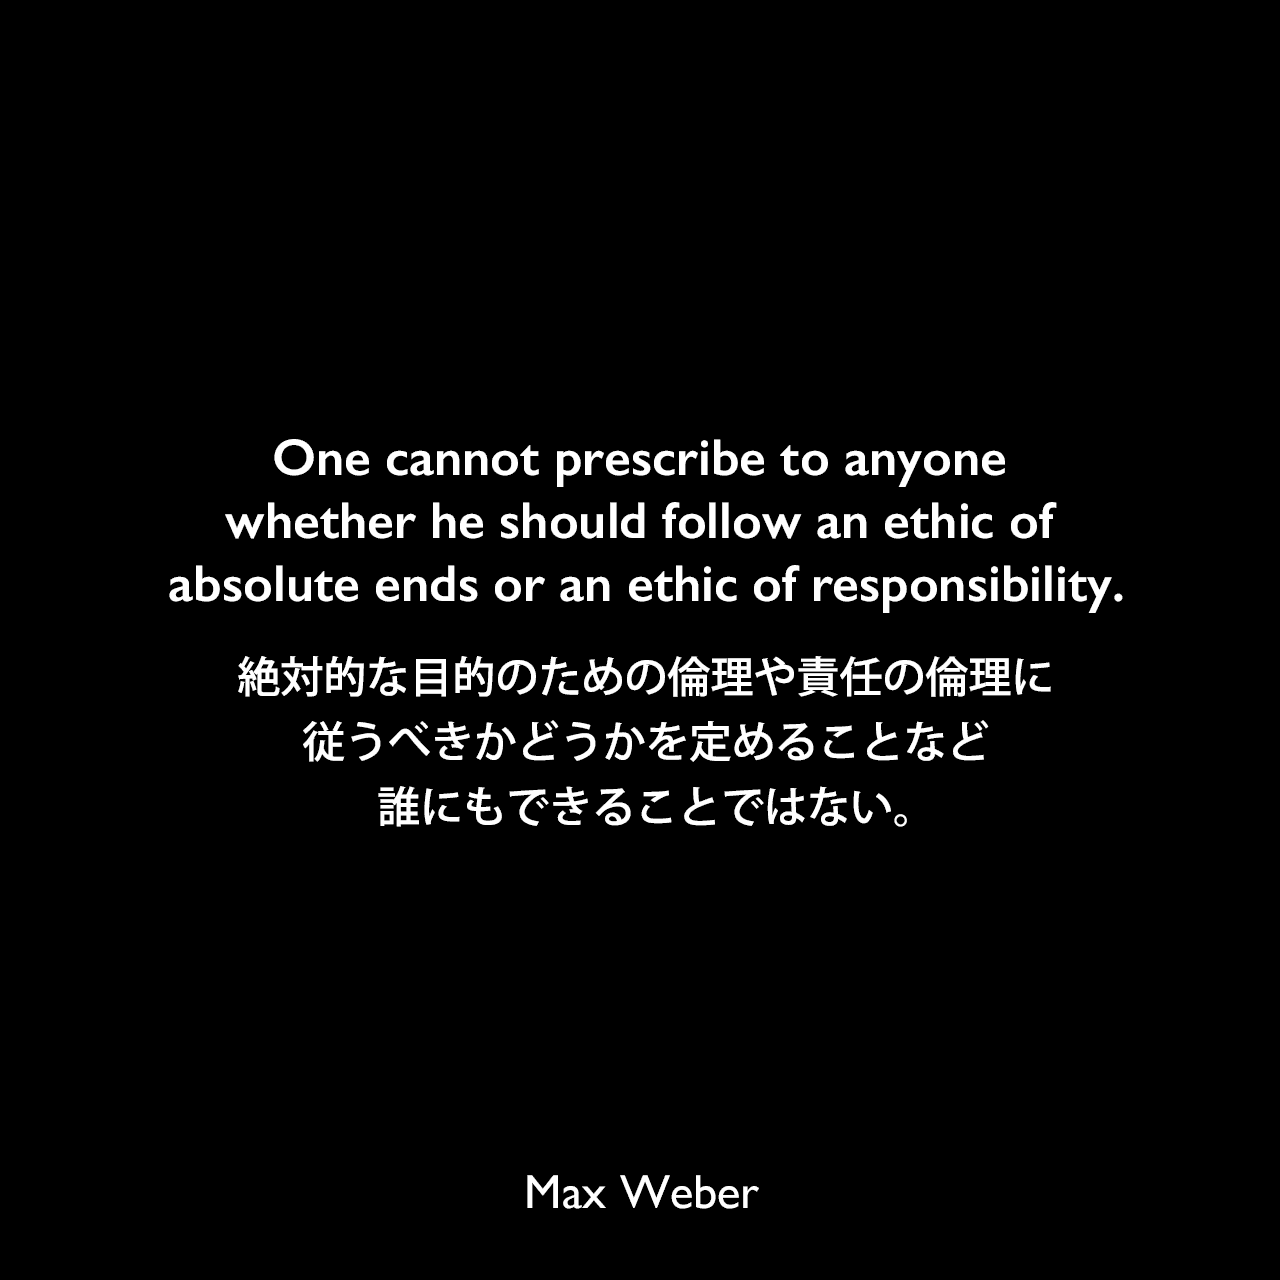 One cannot prescribe to anyone whether he should follow an ethic of absolute ends or an ethic of responsibility.絶対的な目的のための倫理や責任の倫理に従うべきかどうかを定めることなど、誰にもできることではない。Max Weber